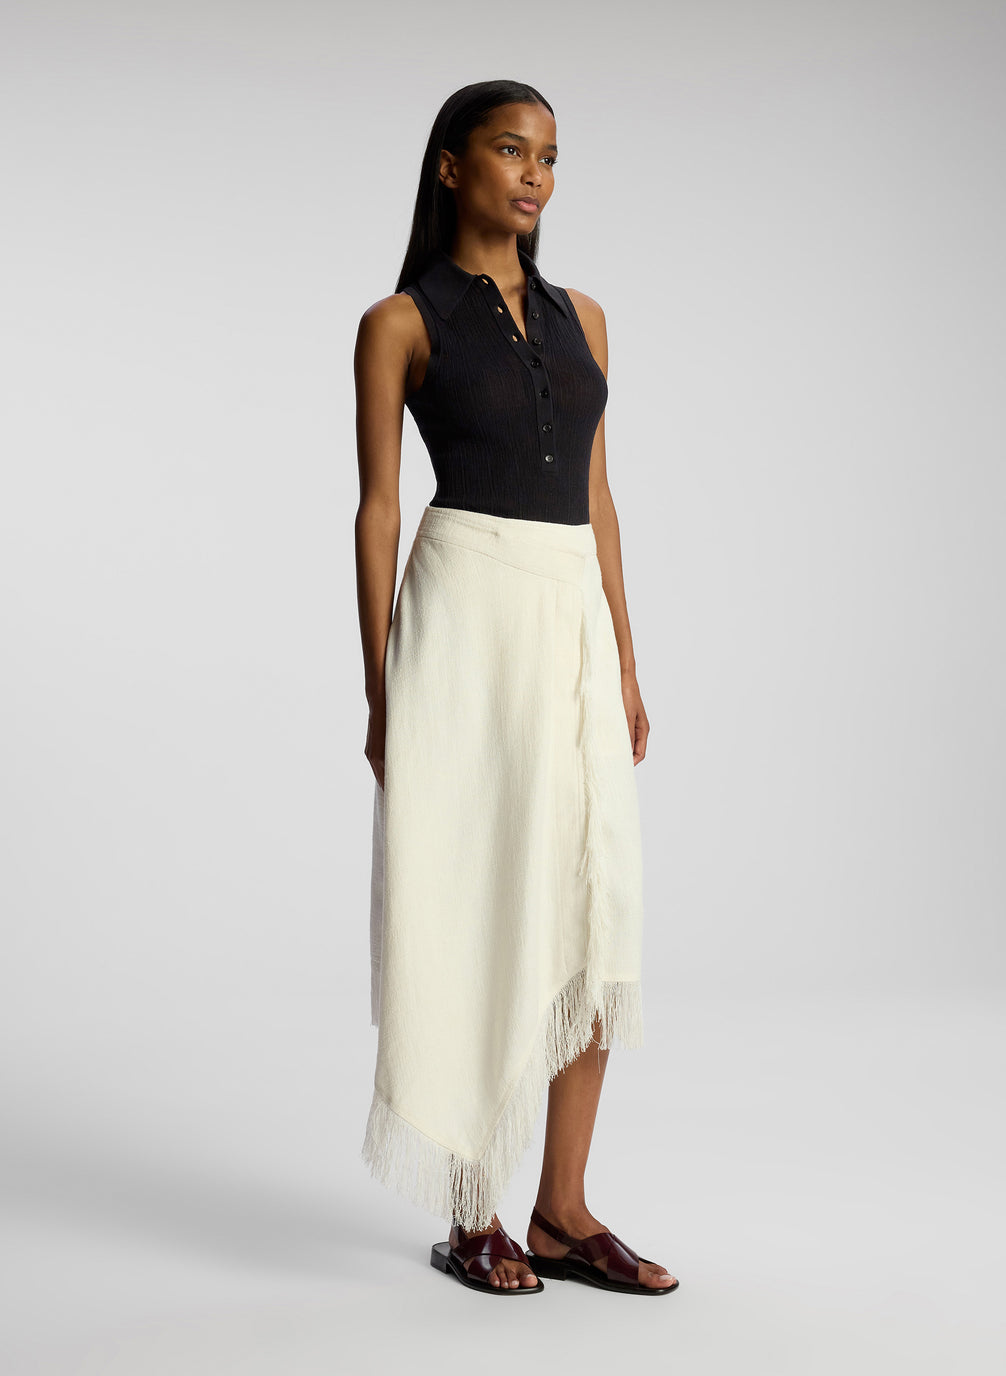 side view of woman wearing black collared sleeveless shirt and white skirt